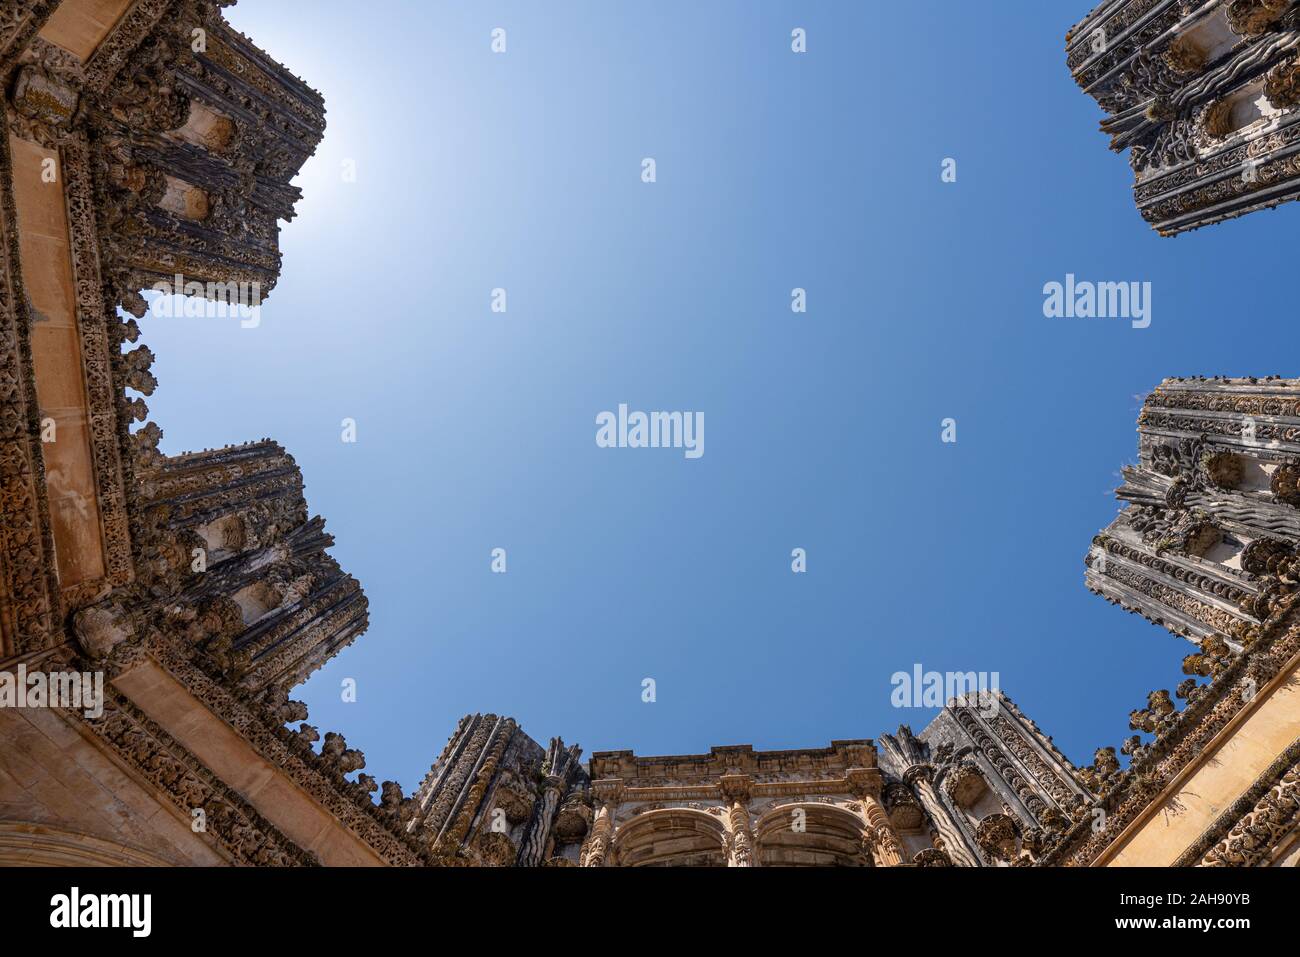 Leiria, Portugal - 20 August 2019: Manueline carvings on columns of the unfinished Chapels of Batalha Monastery near Leiria in Portugal Stock Photo